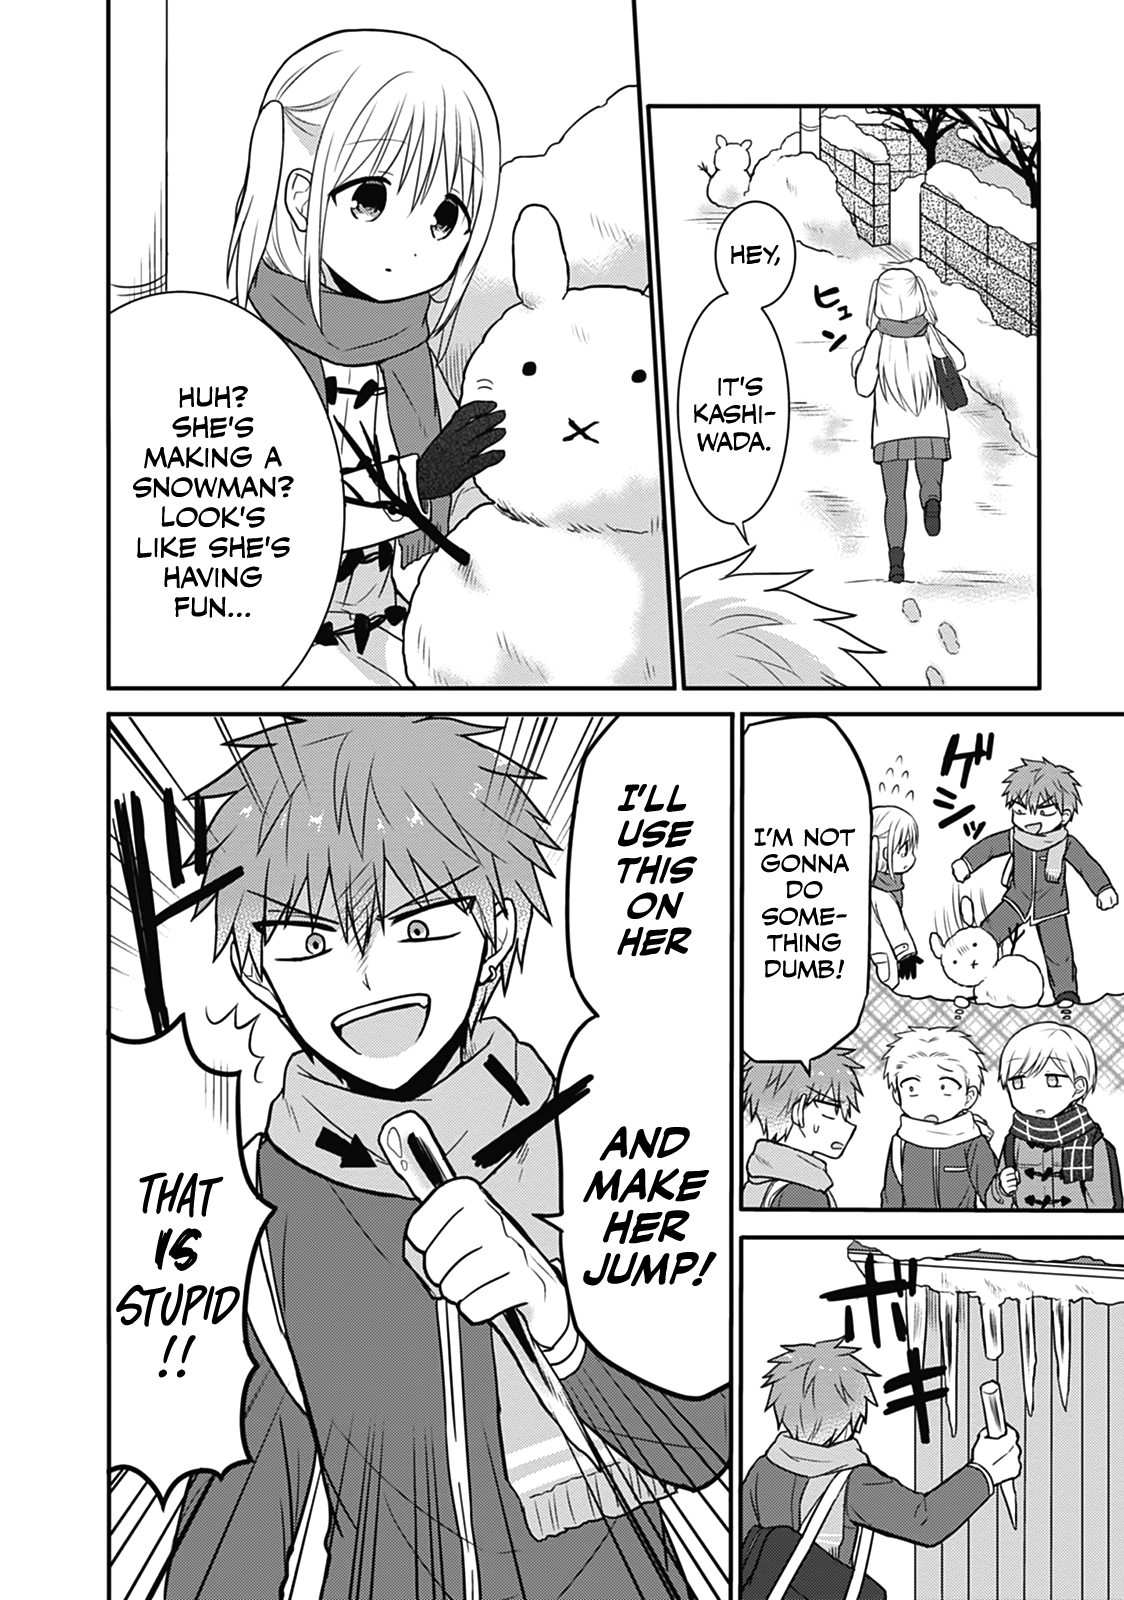 Expressionless Kashiwada-San And Emotional Oota-Kun Vol.2 Chapter 17: Oota-Kun And Kashiwada-San's Snowball Fight - Picture 2